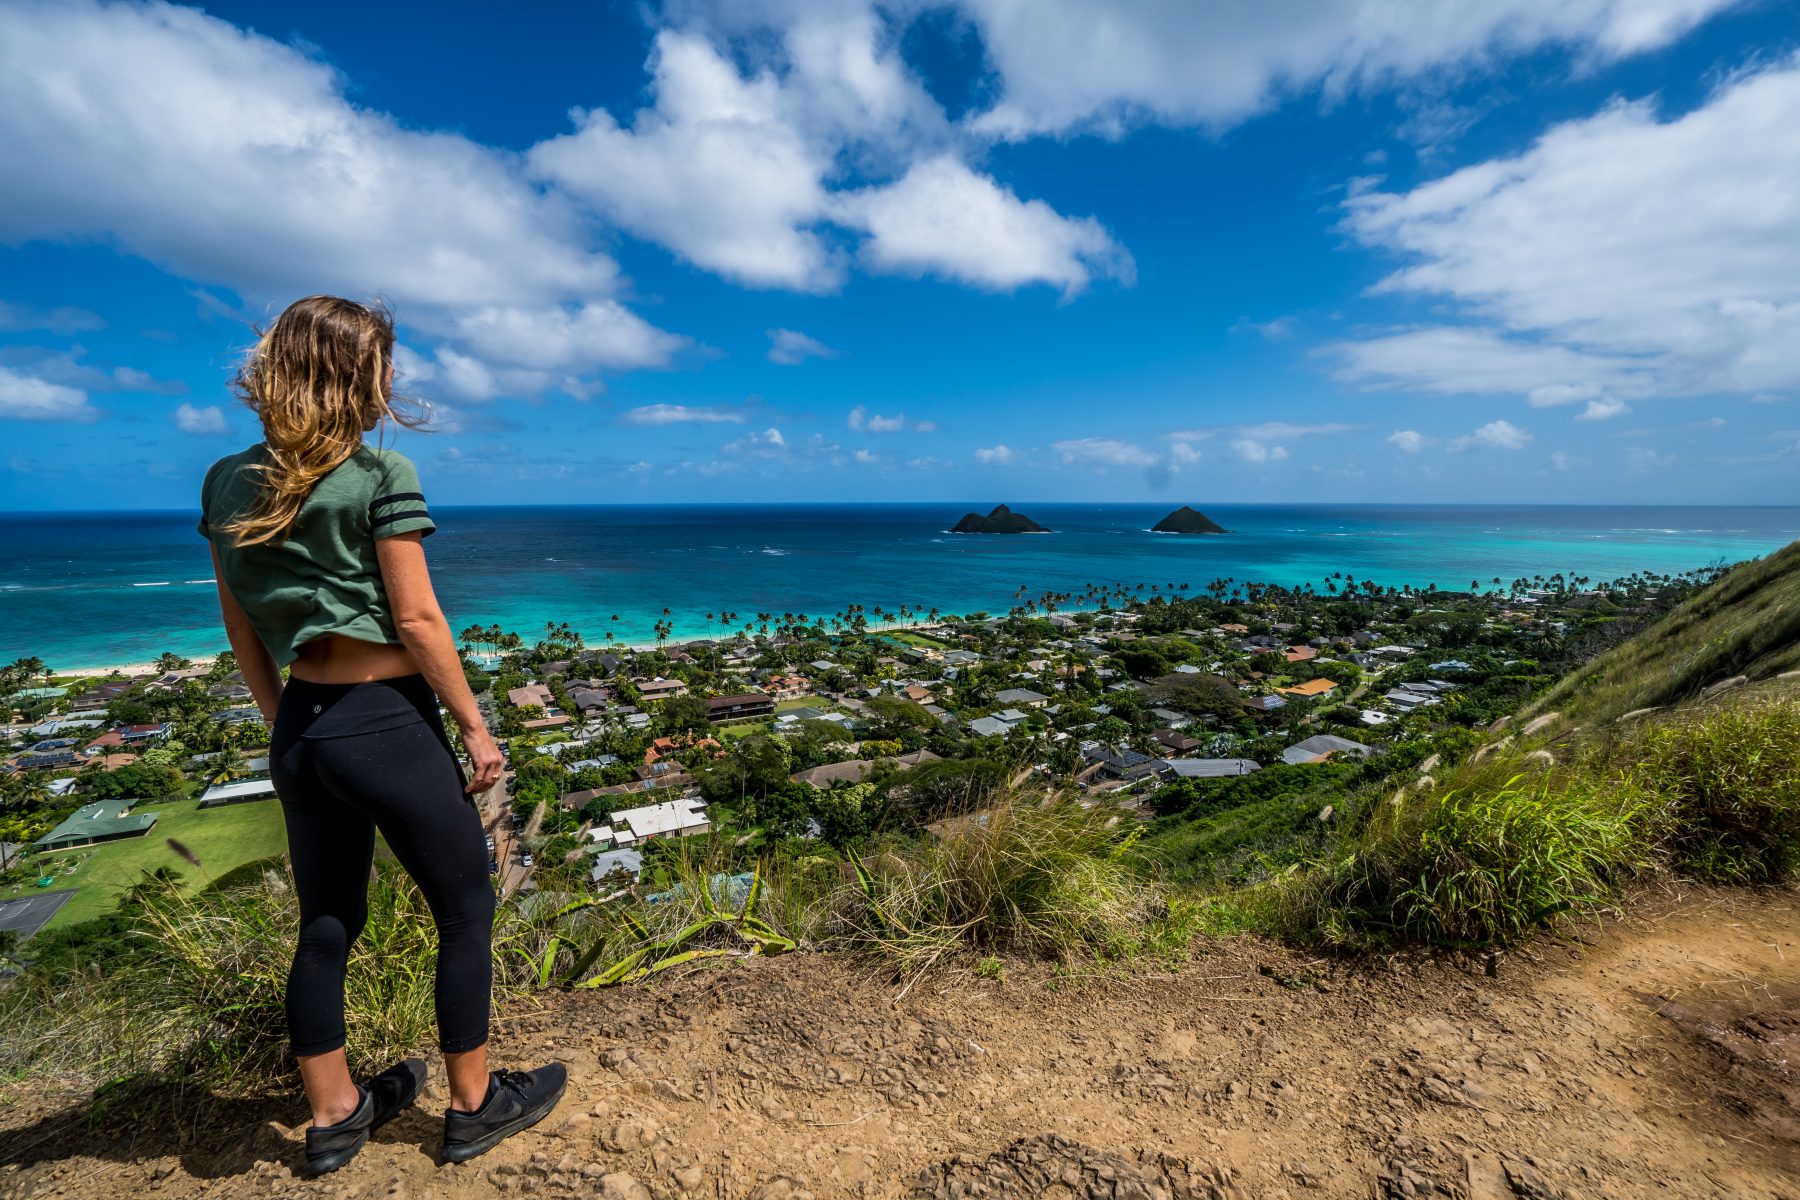 You can see why the Lanikai Pillbox hike has become so popular.